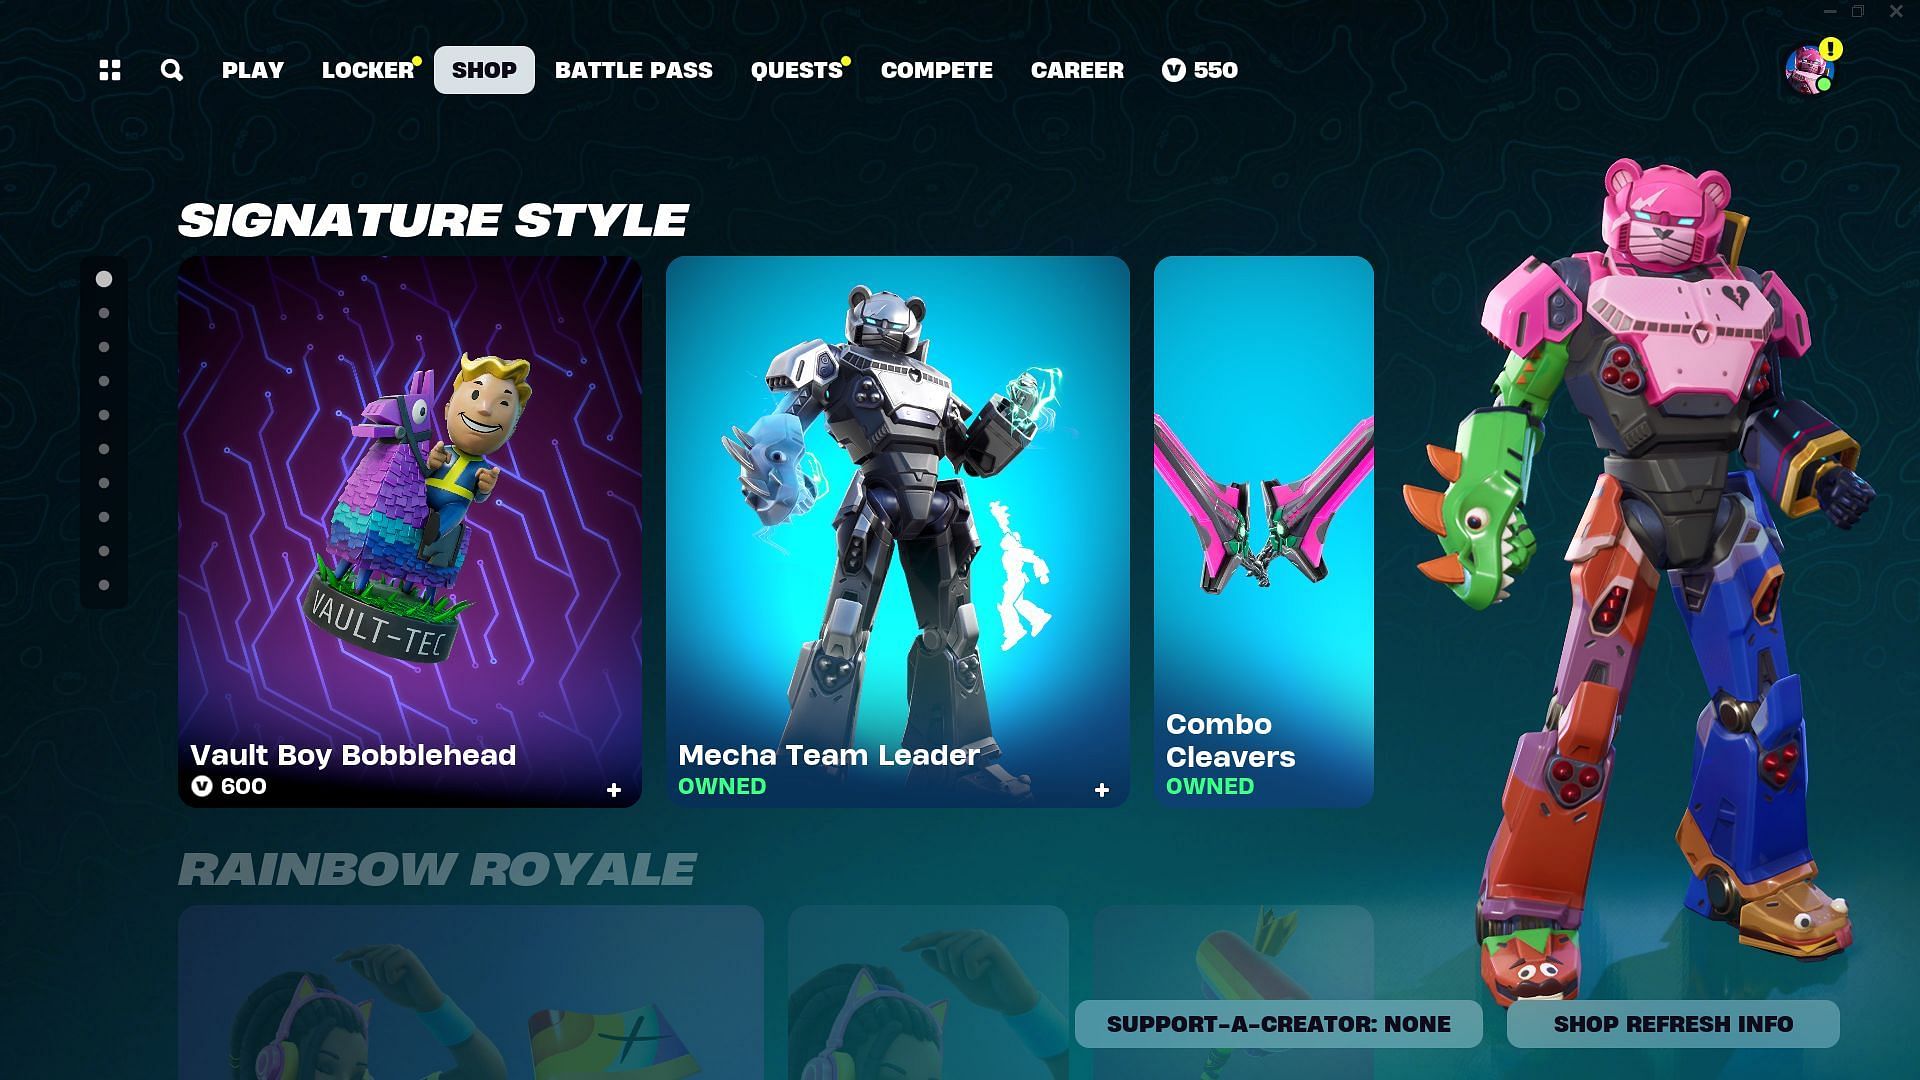 You can now purchase Mecha Team Leader skin in Fortnite (Image via Epic Games)